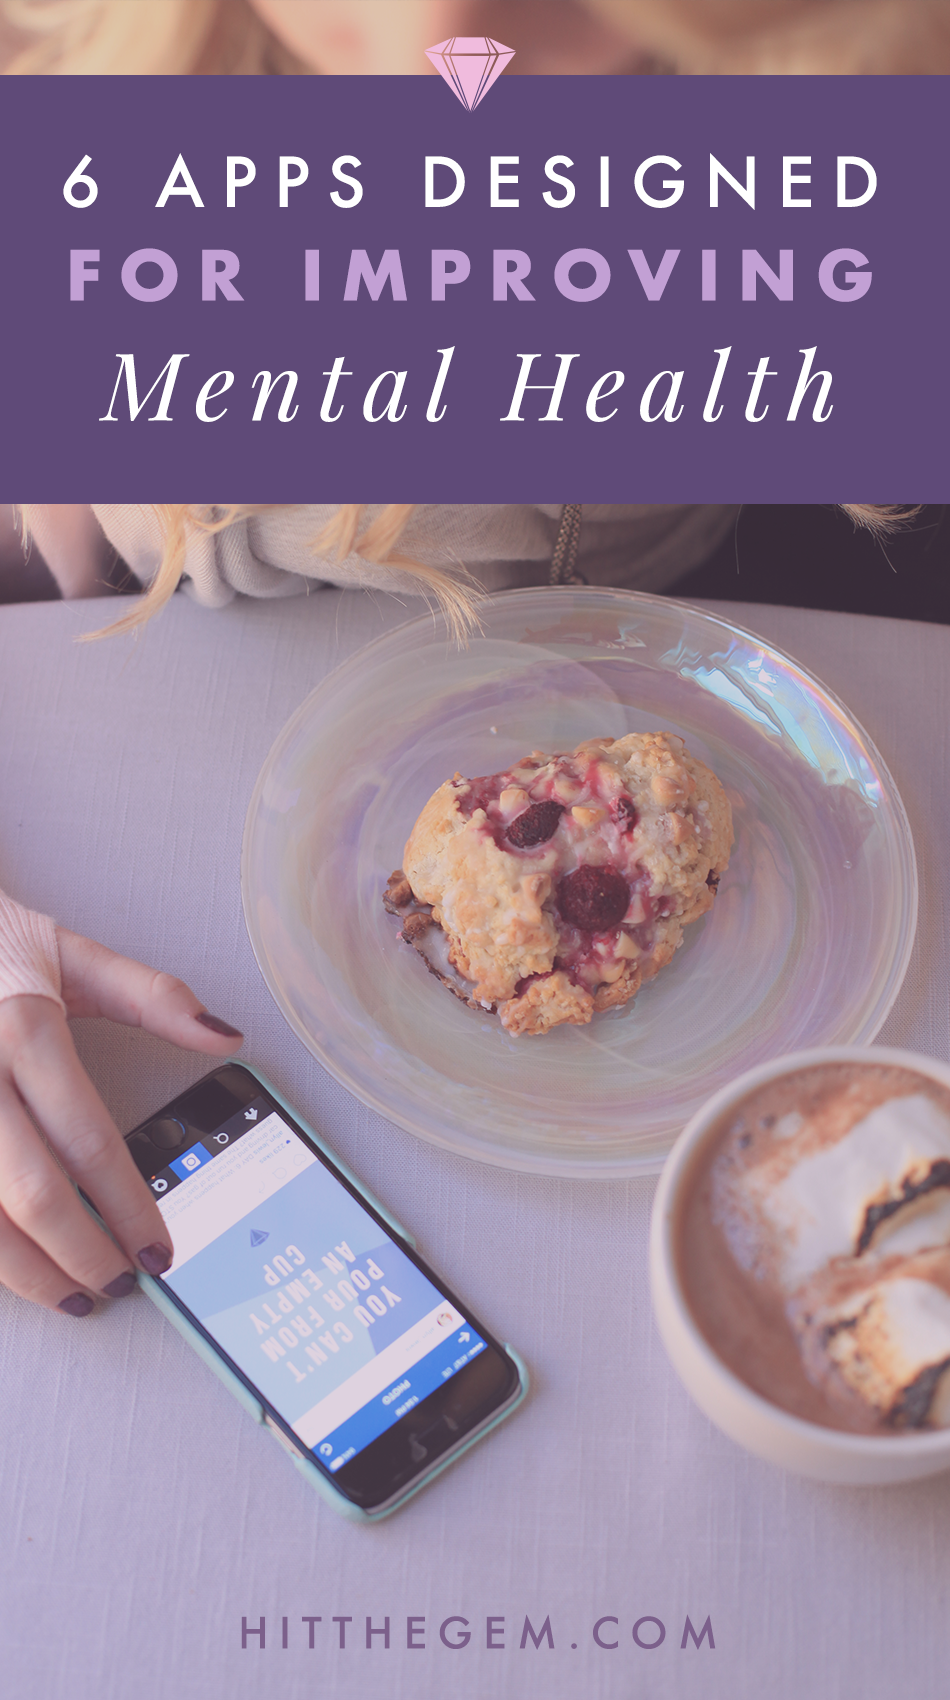 In a world dominated by technology, those of us who struggle with a mental illness can feel both the positive and negative impact of that lifestyle. In the spirit of seeing the good in things, I decided to create a post based on technological positivity and put some of my favorite mental health apps in one place.